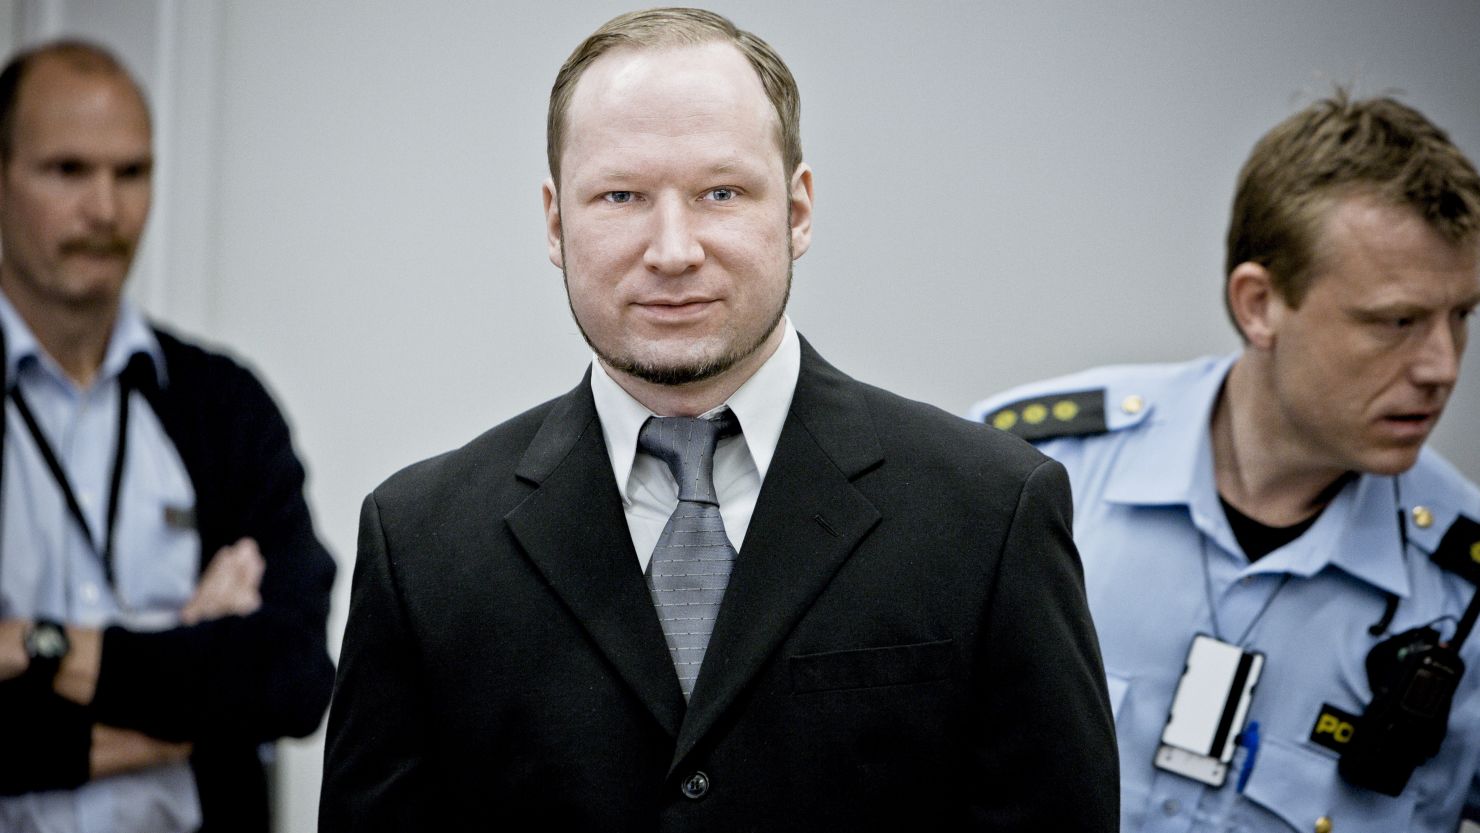 Right-wing extremist Anders Behring Breivik killed dozens of people in co-ordinated attacks in Norway on July 22, 2011.